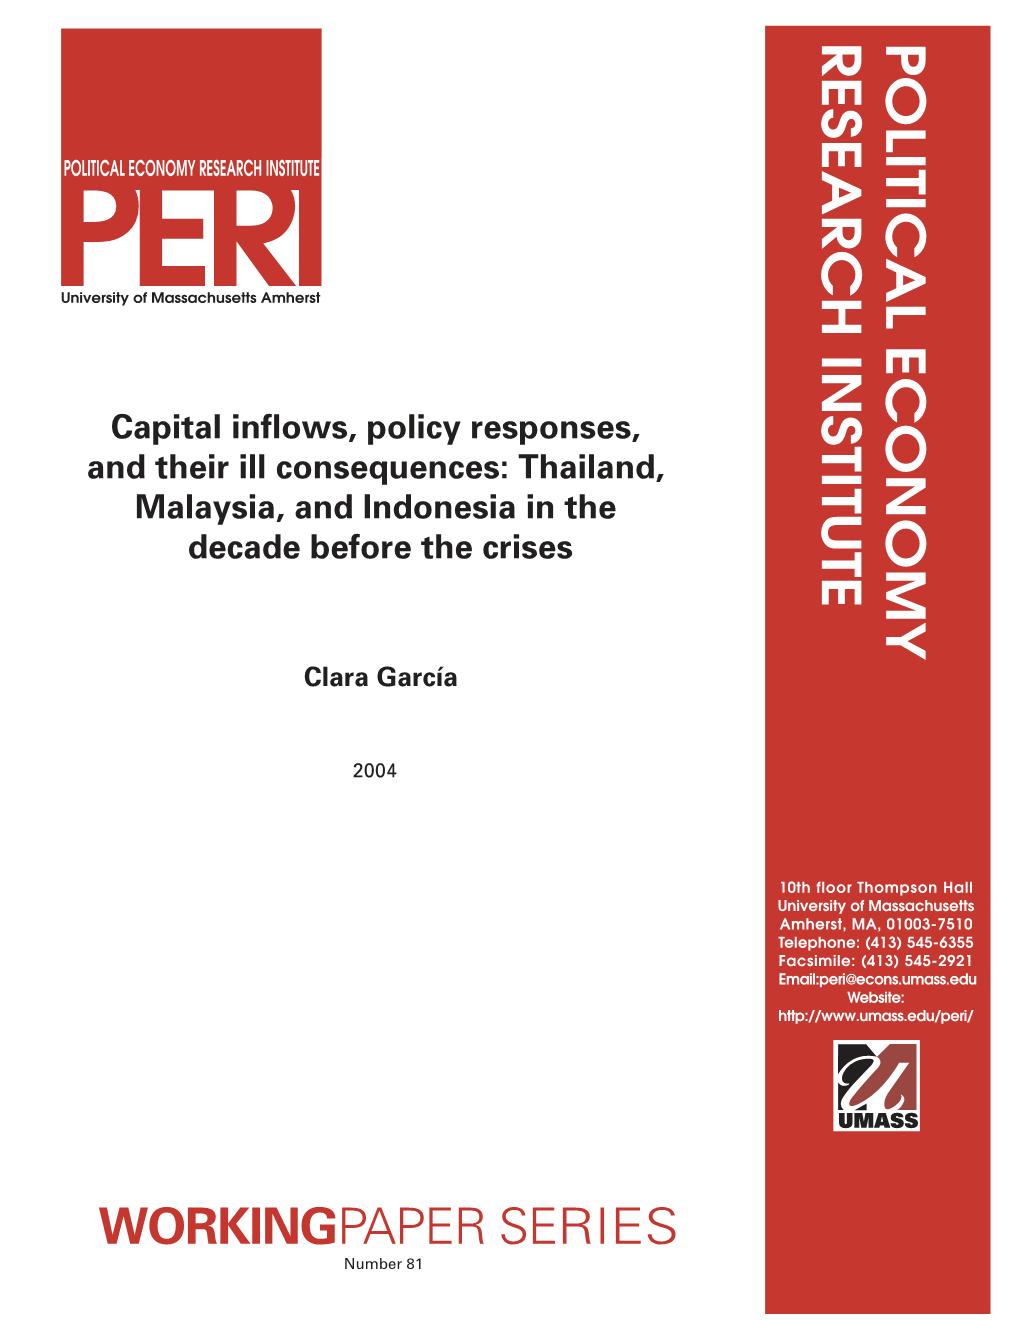 Capital Inflows, Policy Responses, and Their Ill Consequences: Thailand, Malaysia, and Indonesia in the Decade Before the Crises